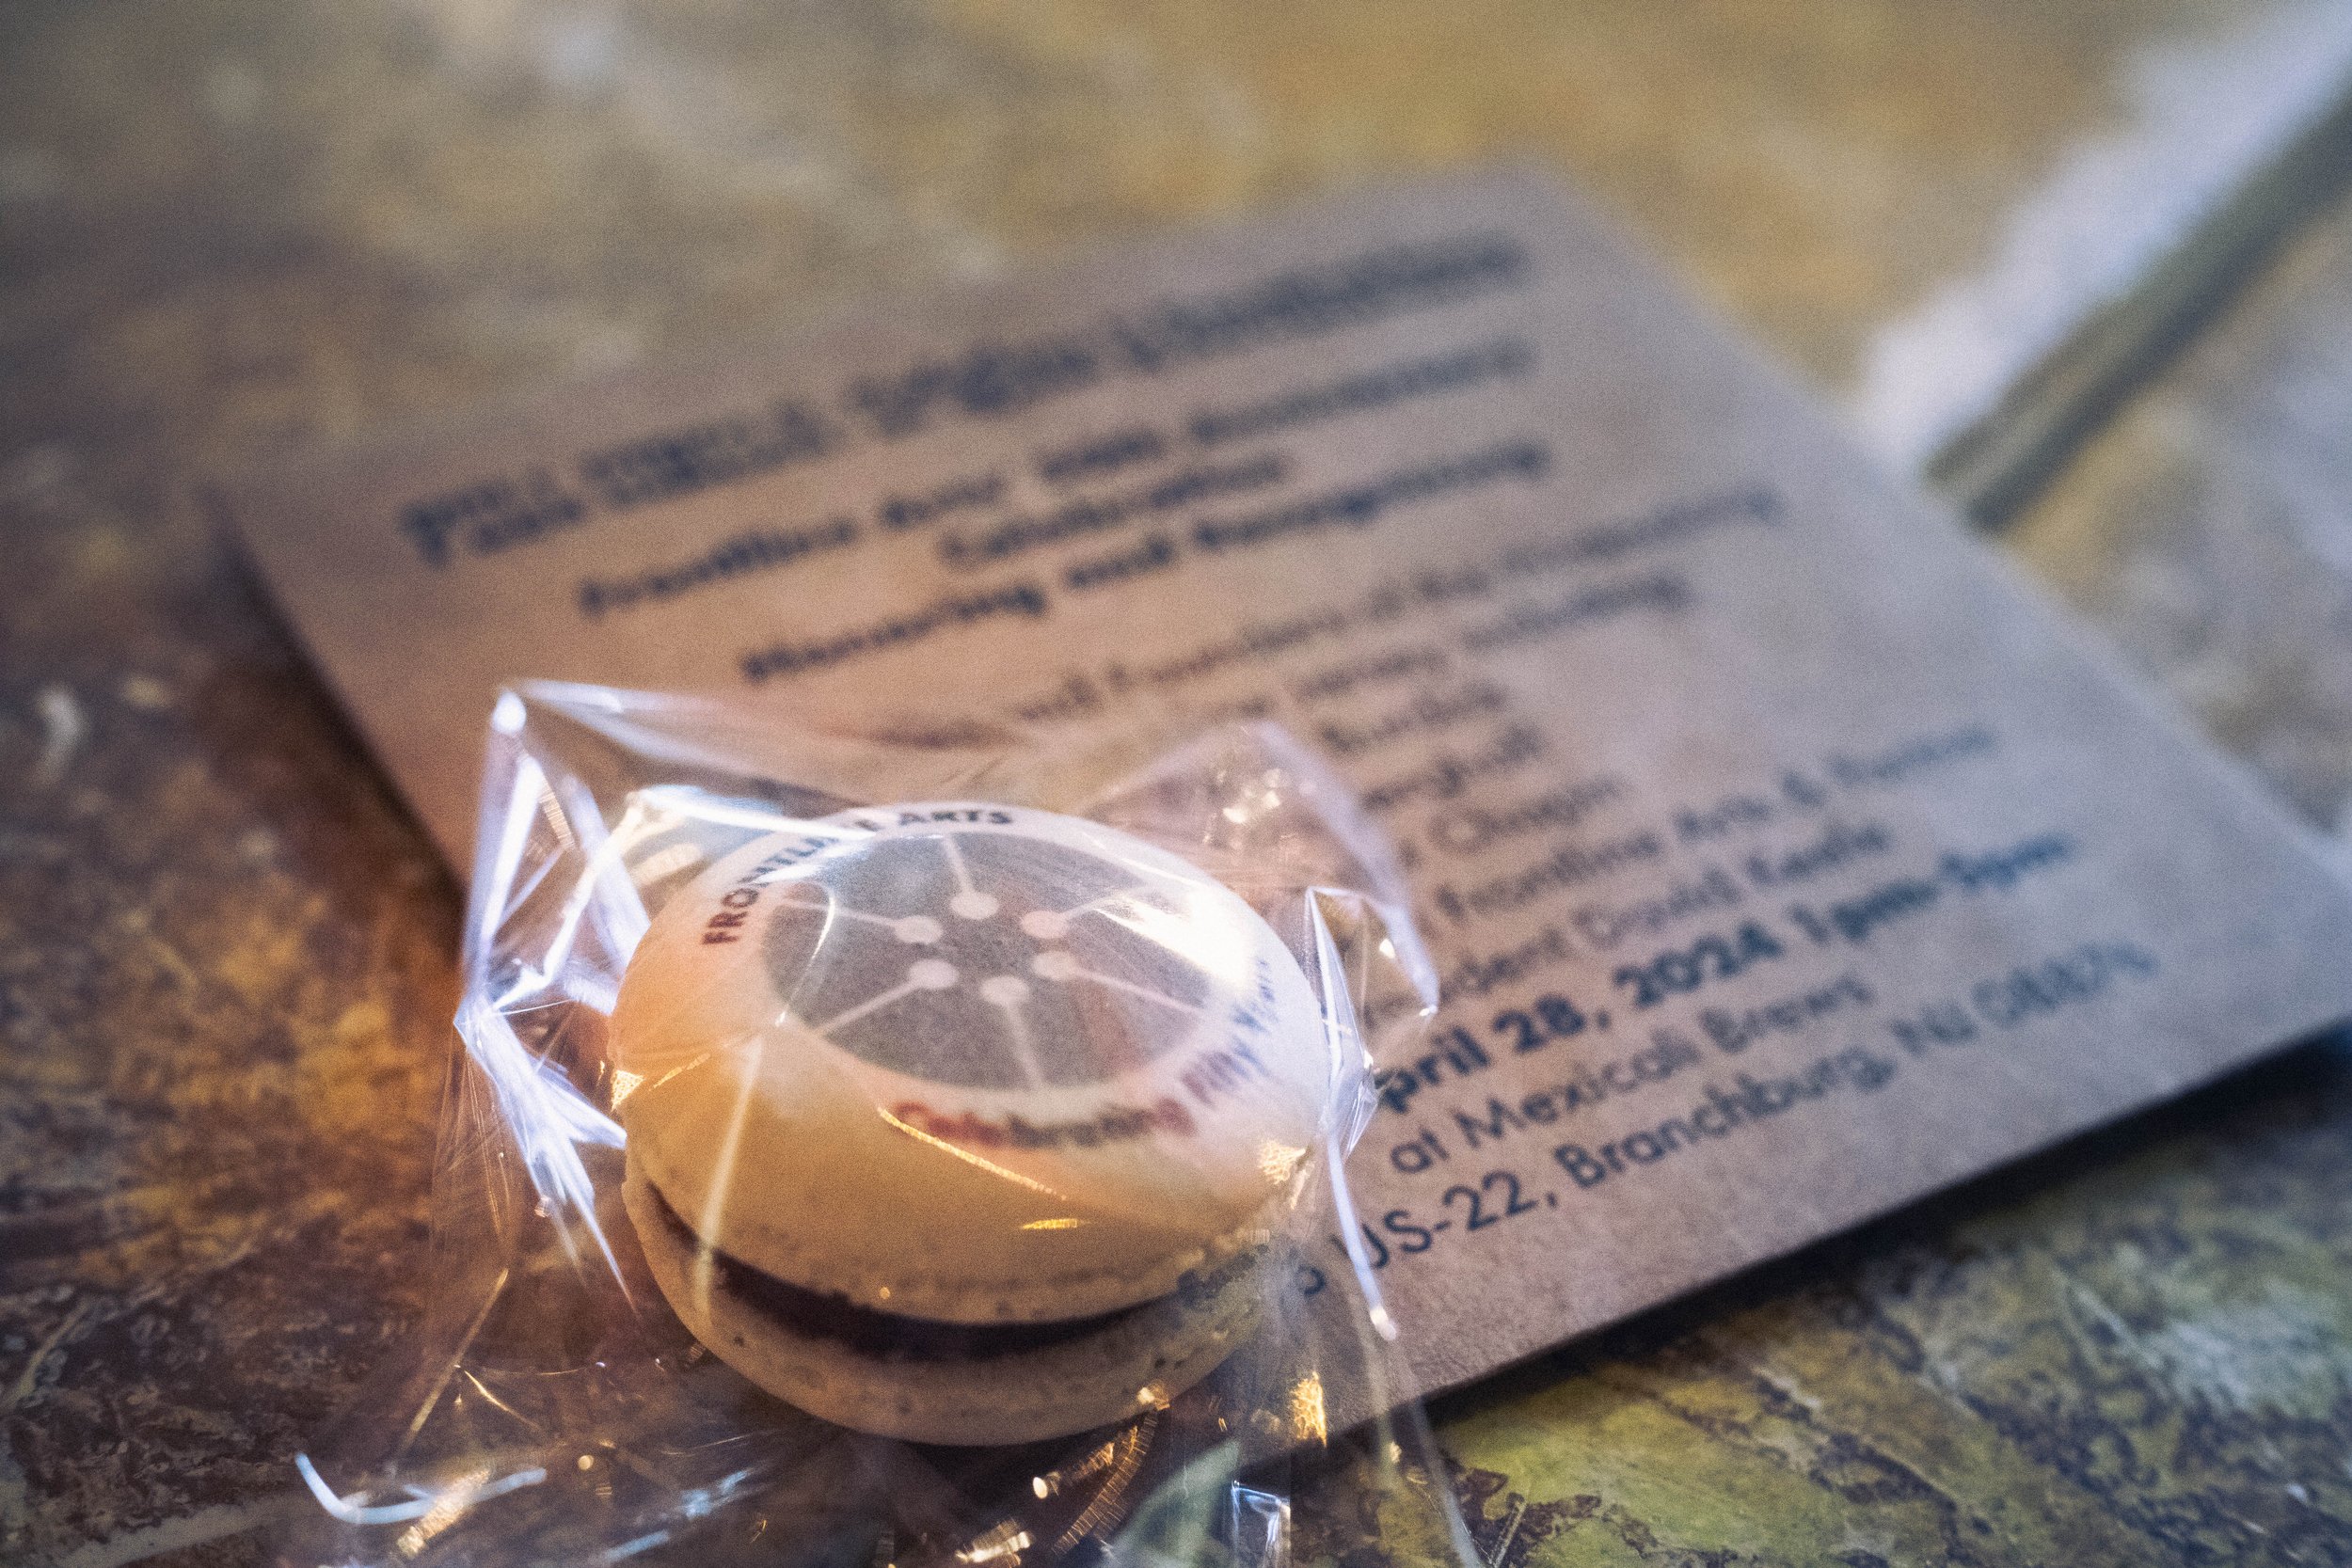  A sealed macaron with the Frontline Arts logo printed on top of it lays on a table with an itinerary laying underneath like a place mat. The itinerary describes the event and honorees. 